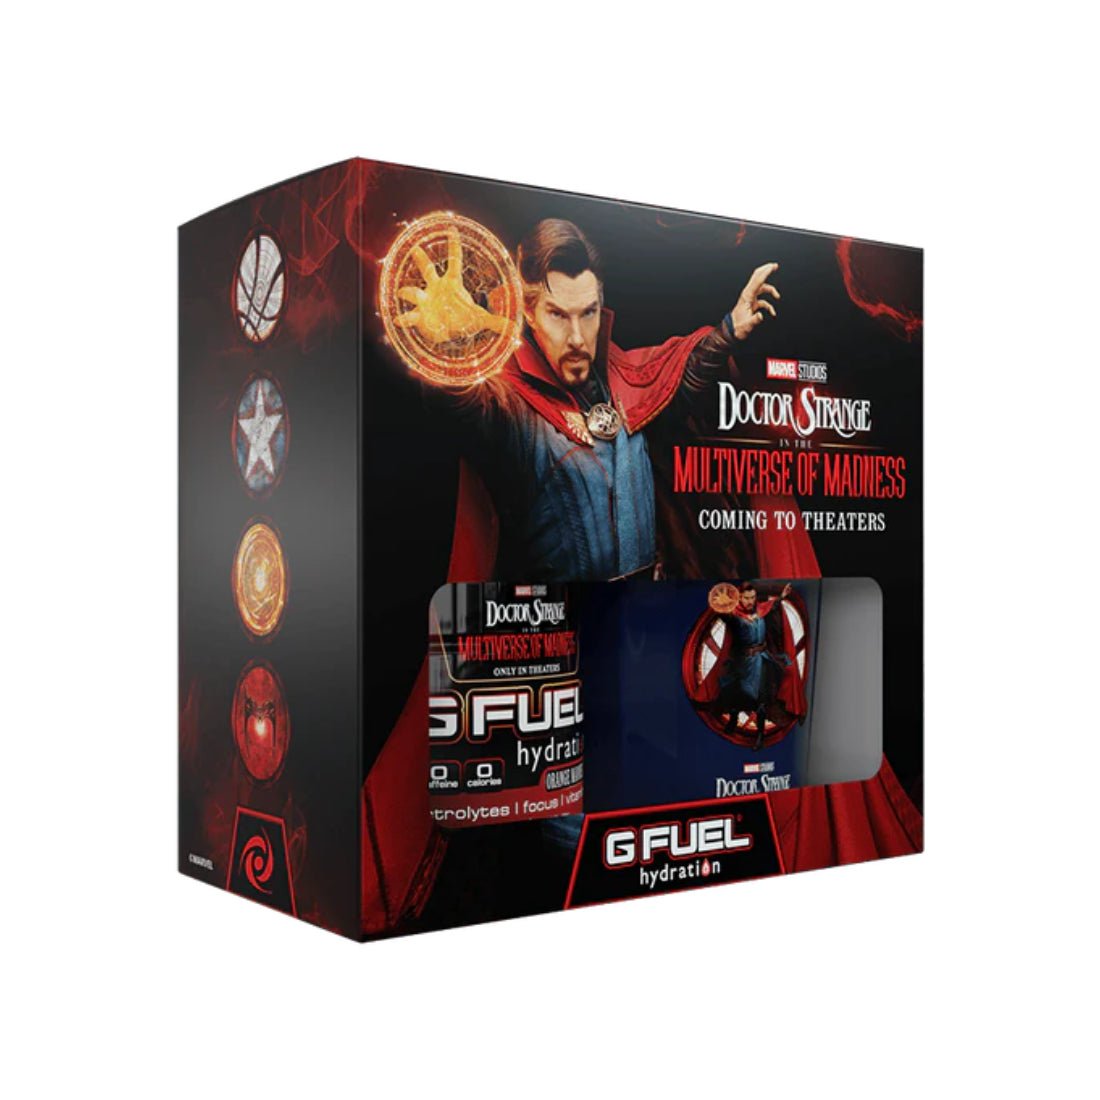 GFuel Doctor Strange Multiverse of Madness Hydration Collector's Box Tub + Shaker Cup - مشروب طاقة - Store 974 | ستور ٩٧٤